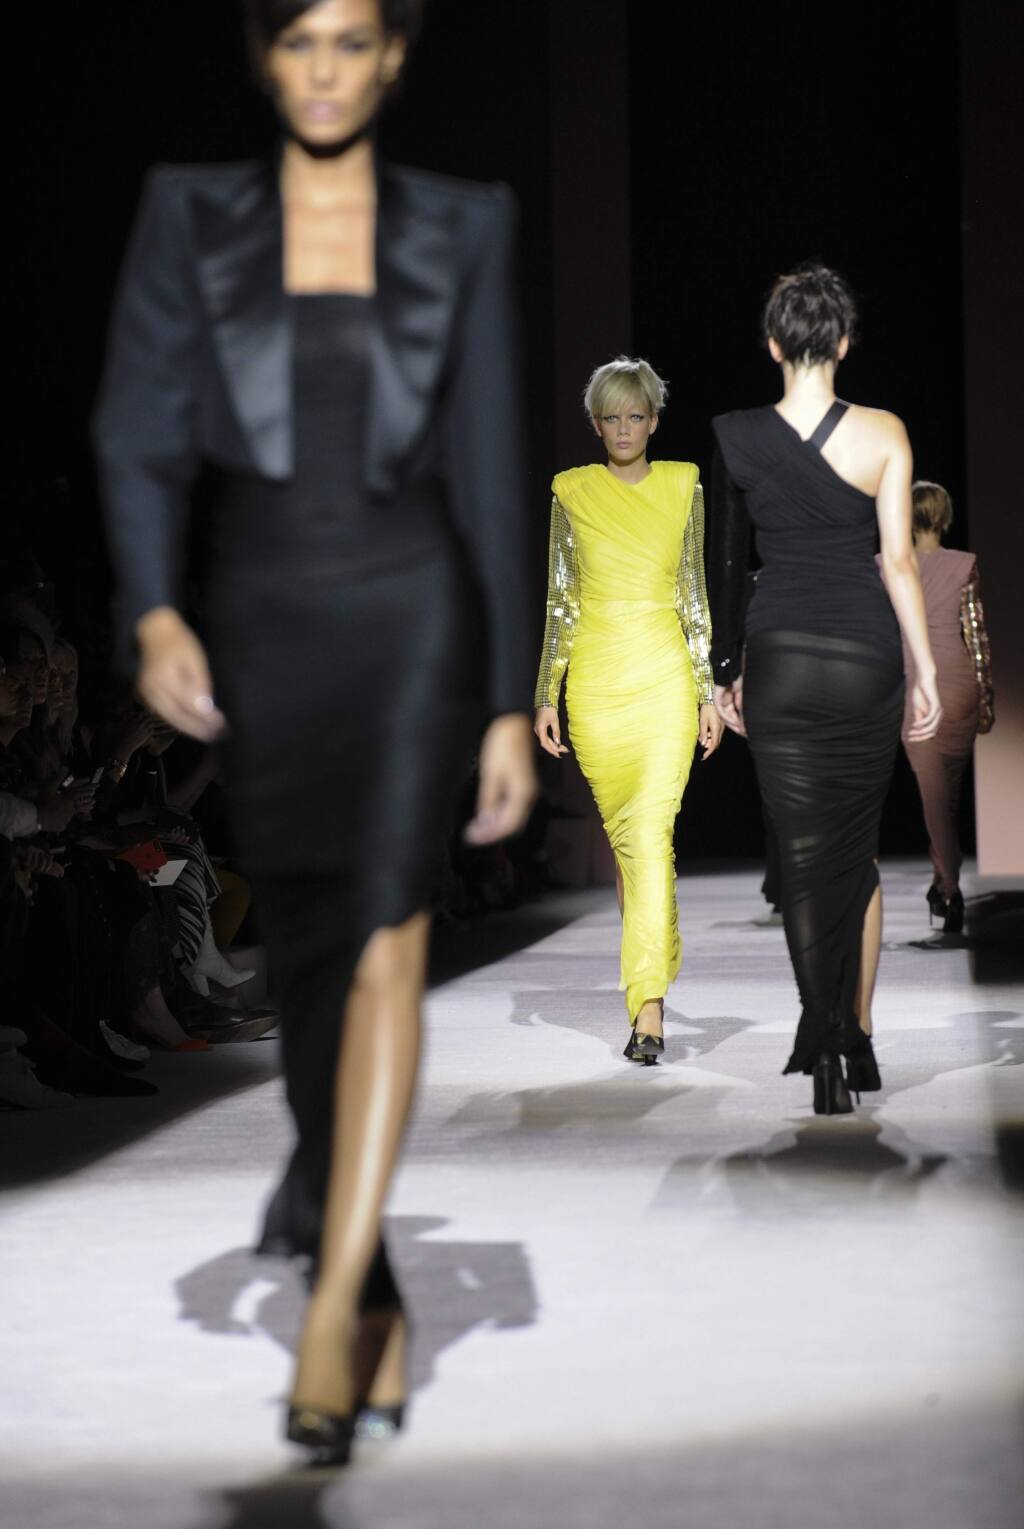 Tom Ford's Greatest Runway Hits, in Honor of His NYFW Return